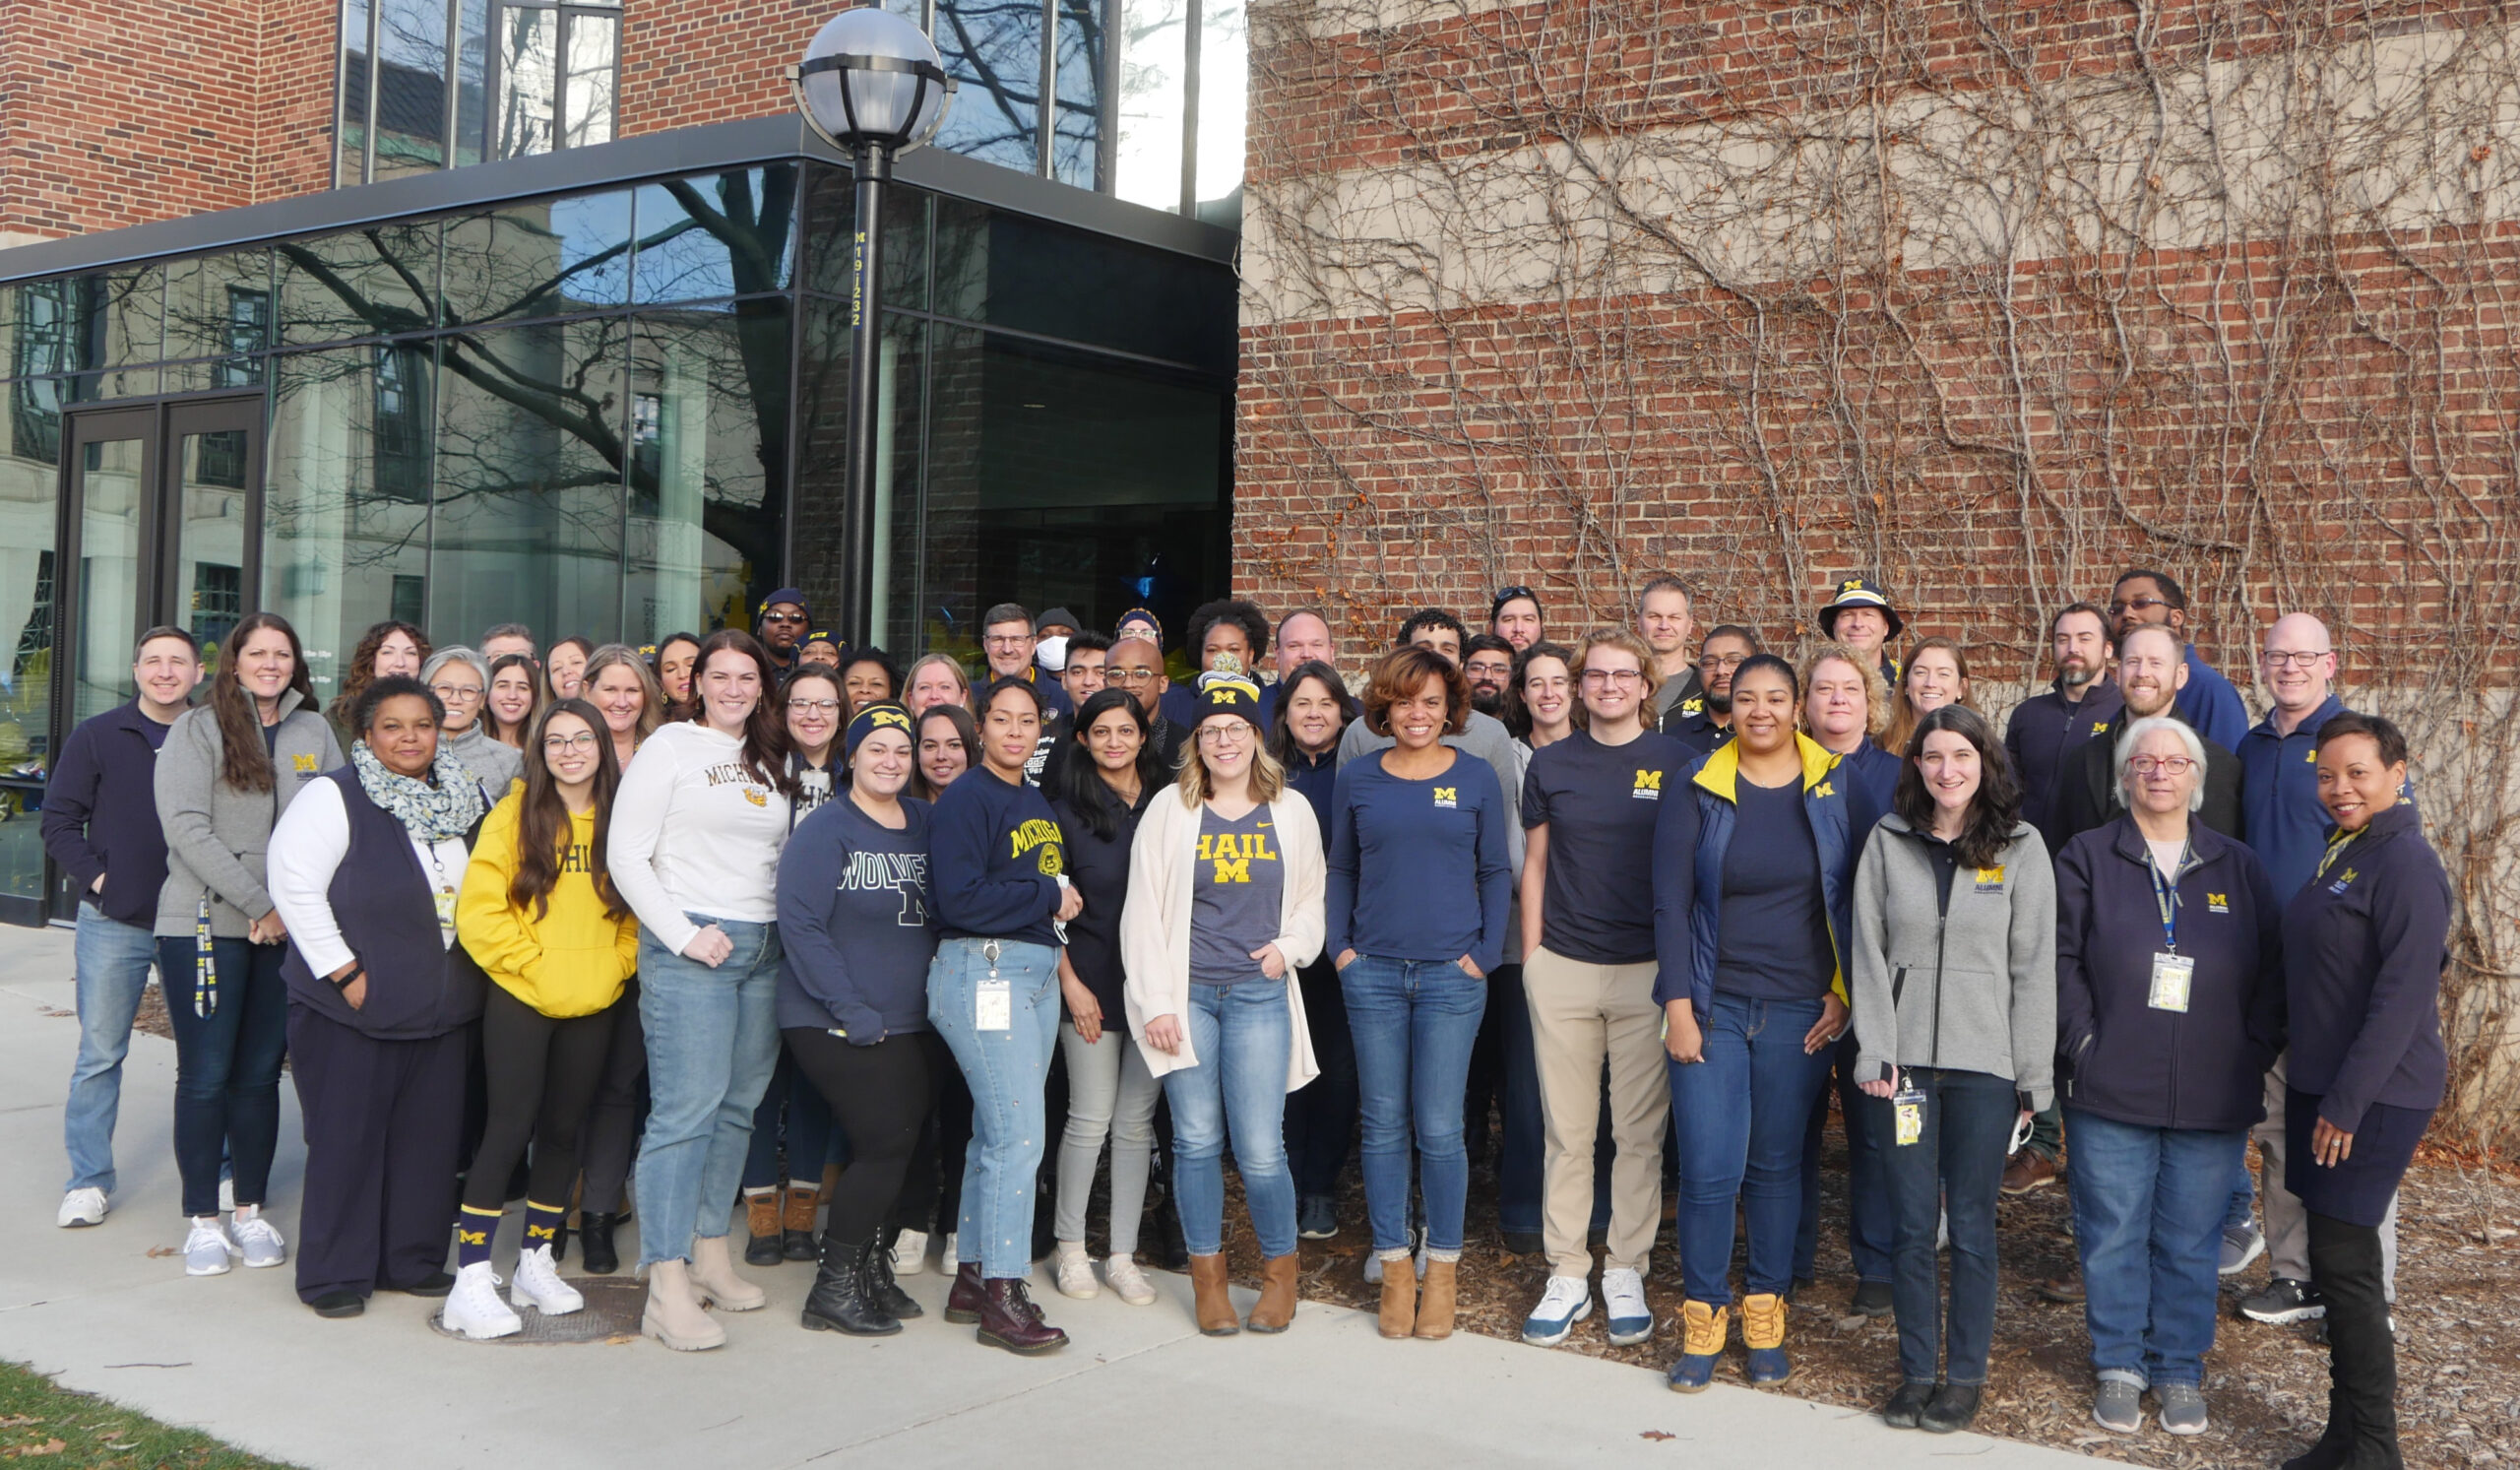 The staff of the Alumni Association of the University of Michigan